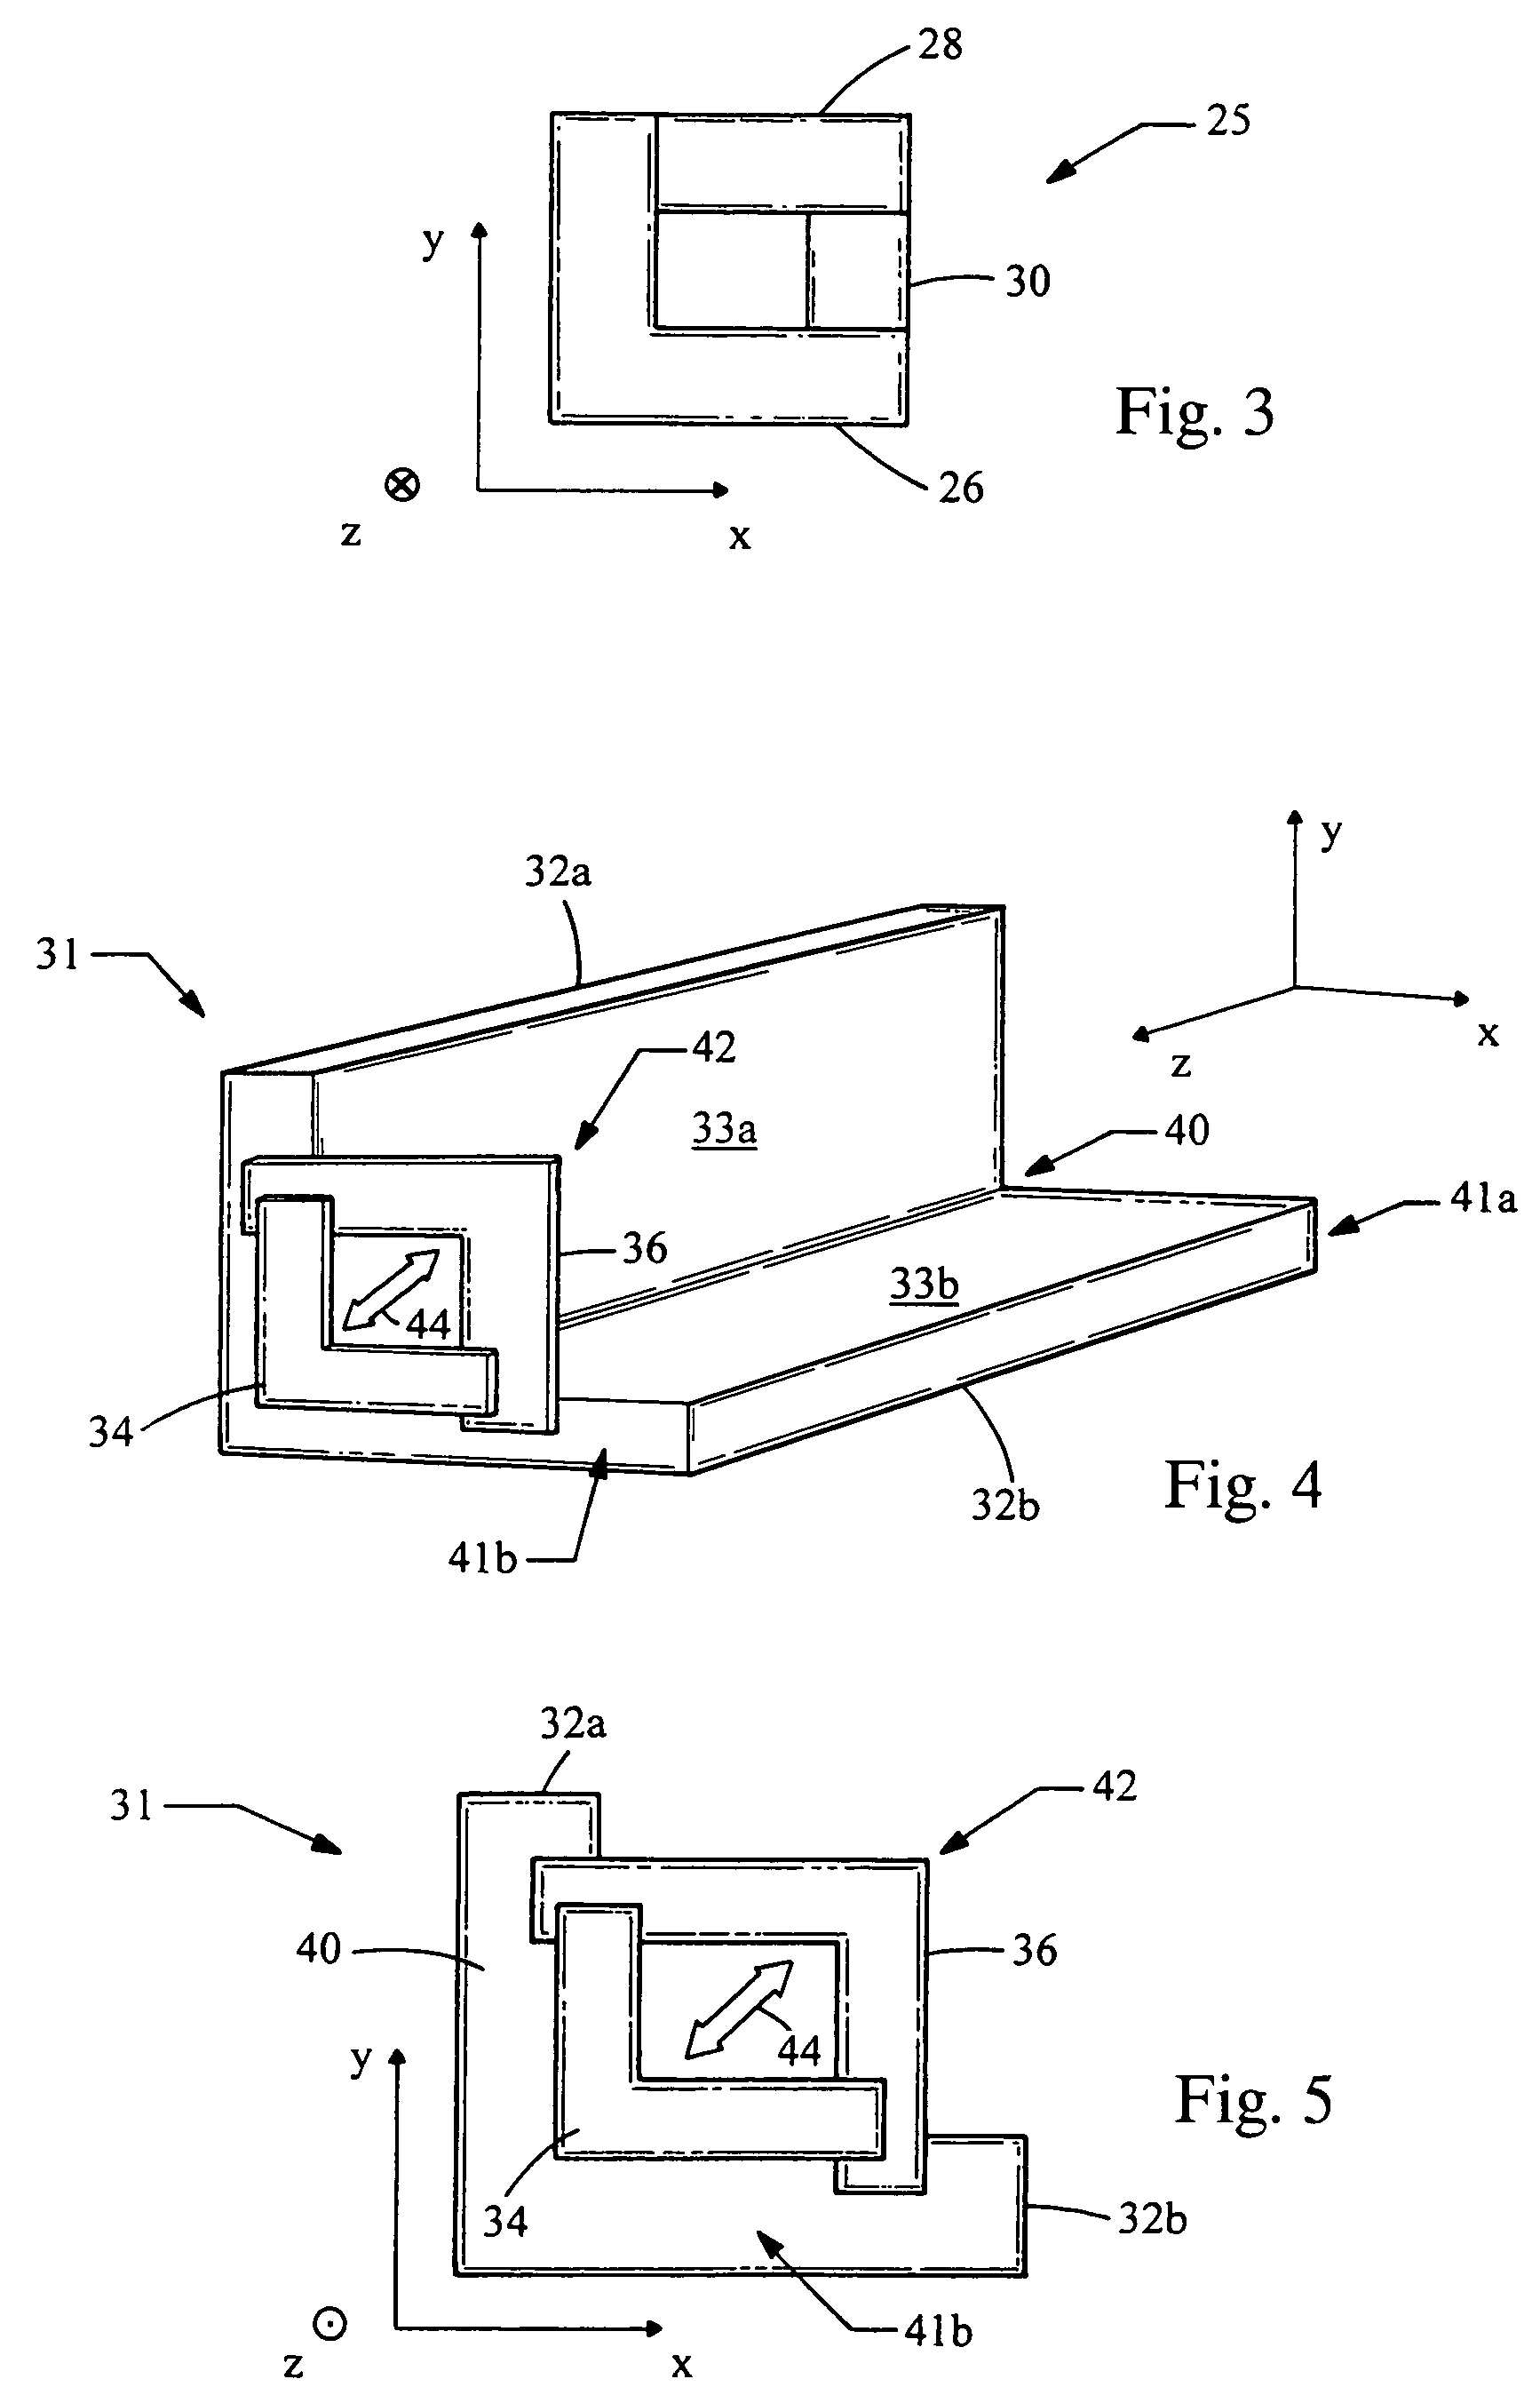 X-ray optical system with adjustable convergence